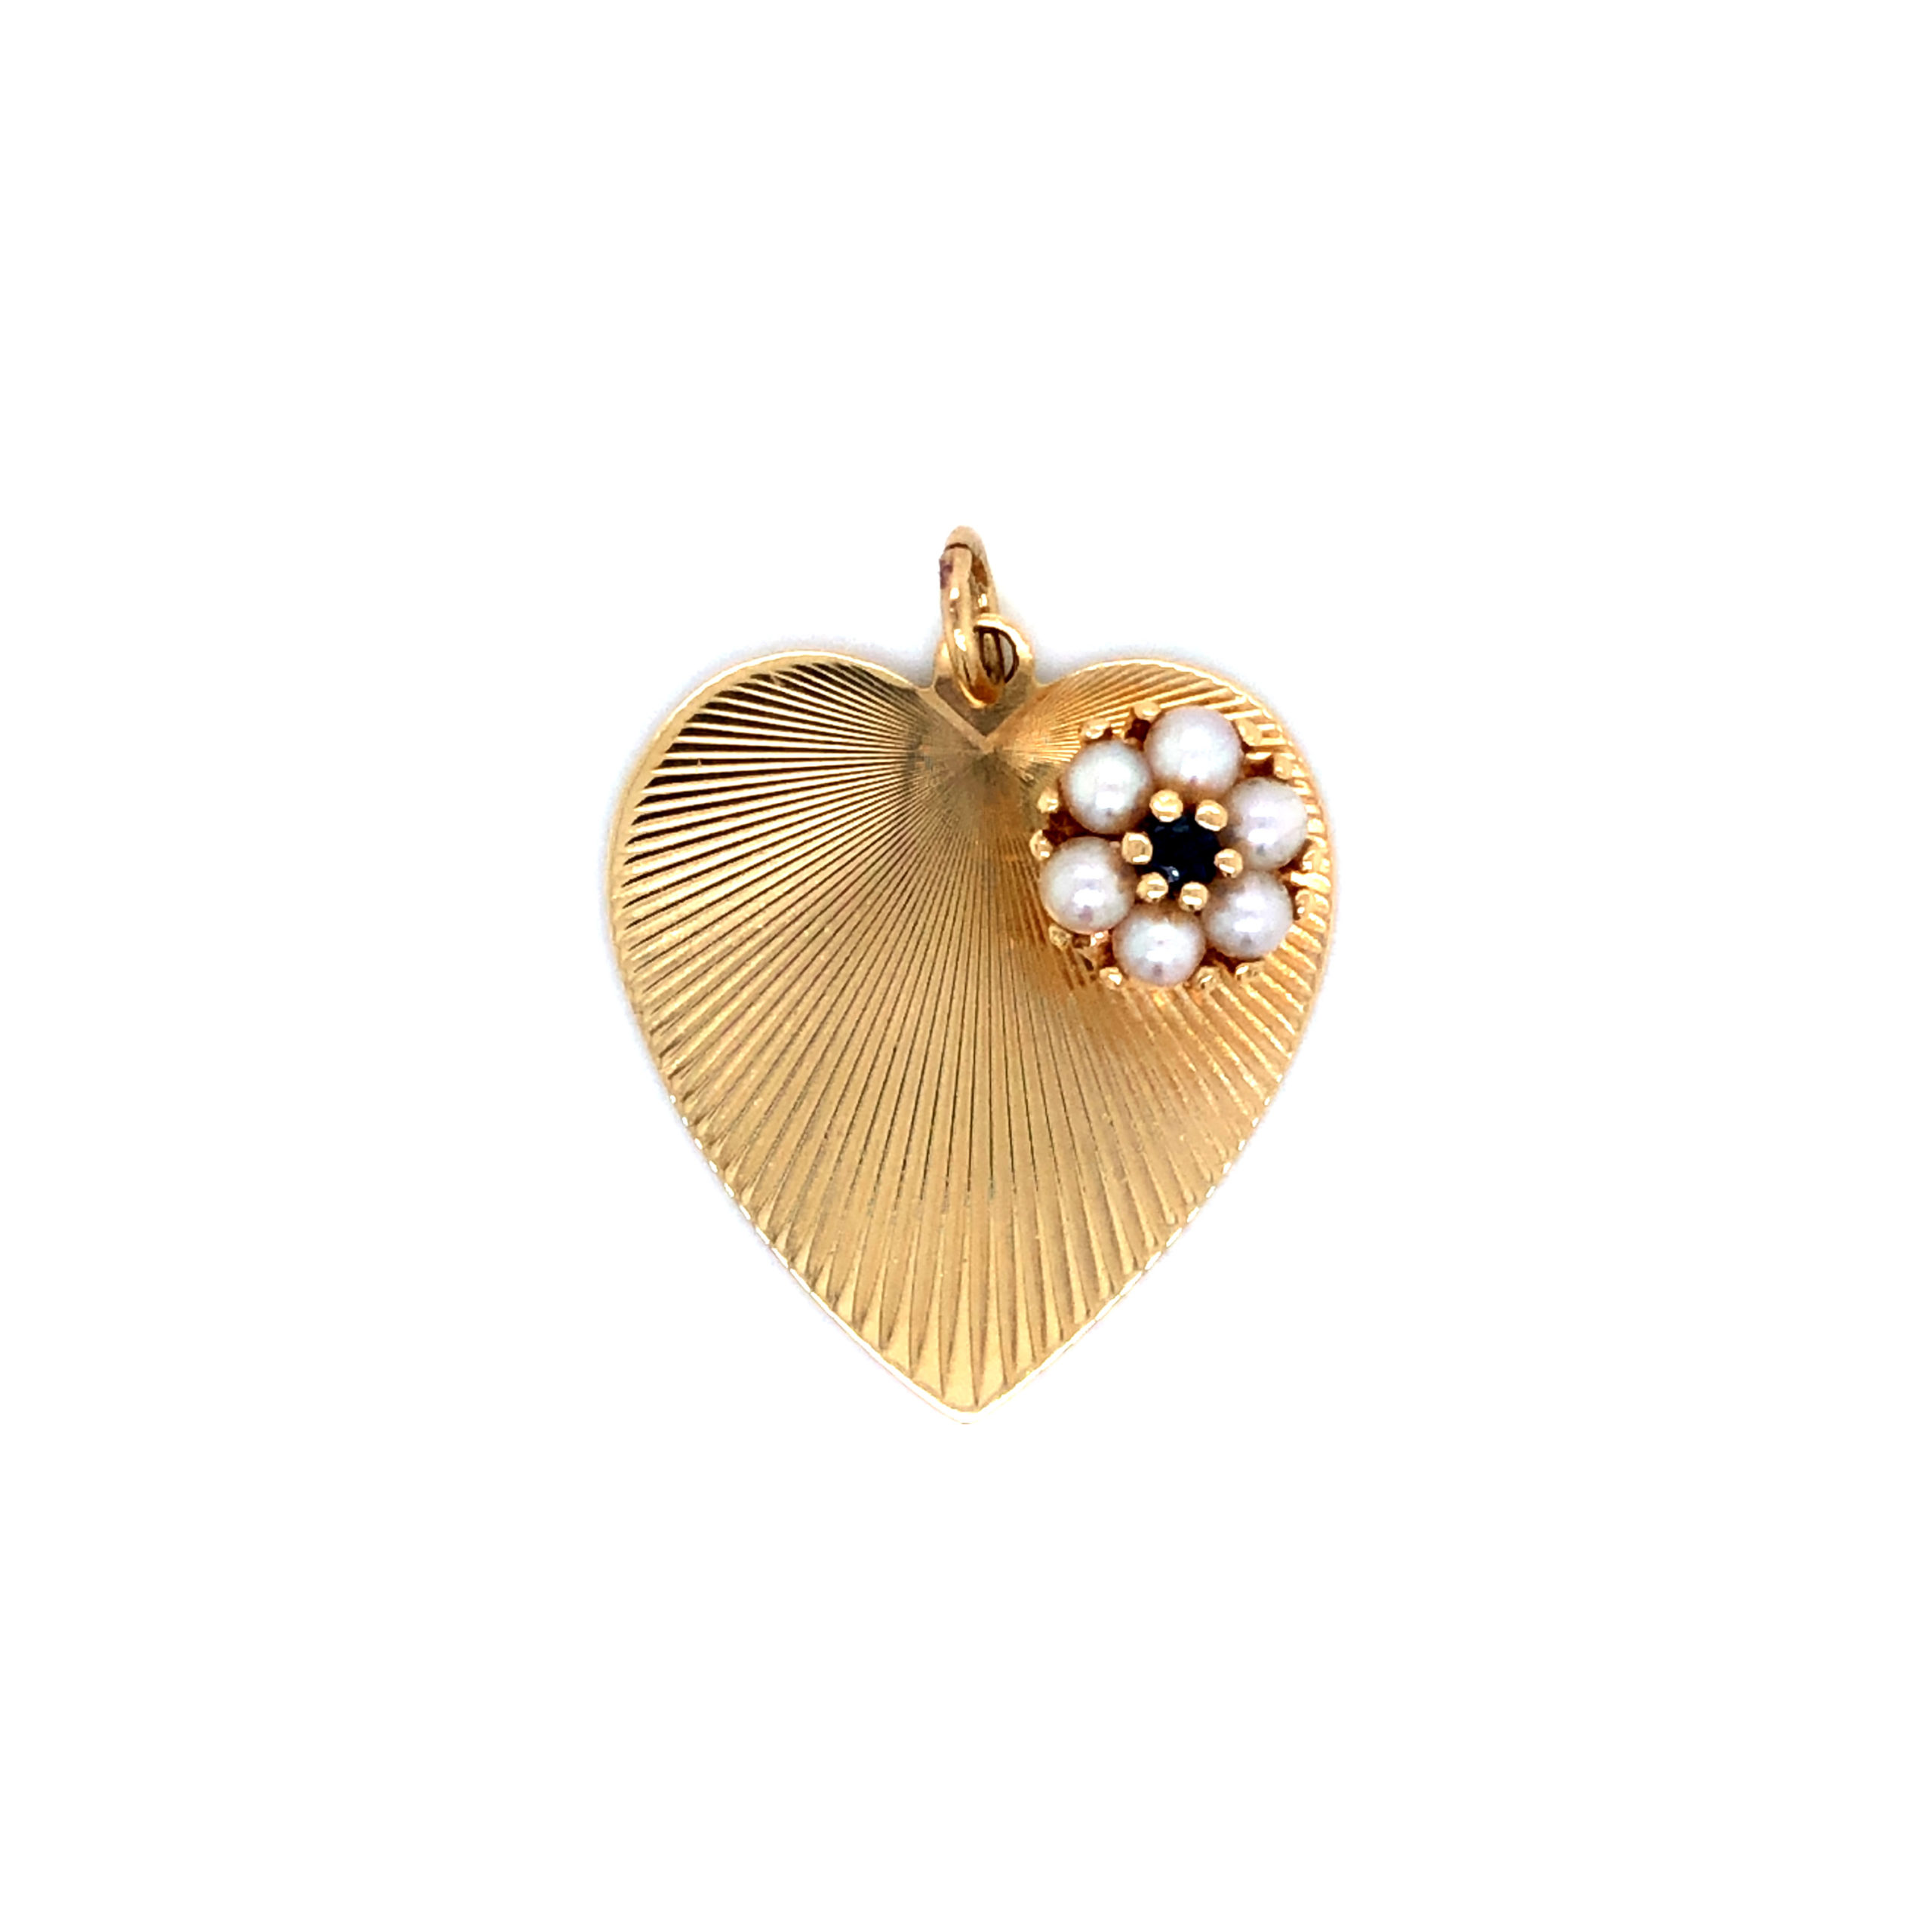 Vintage 14K Yellow Gold Sunburst Heart Charm with Cultured Pearl - Ruby Lane